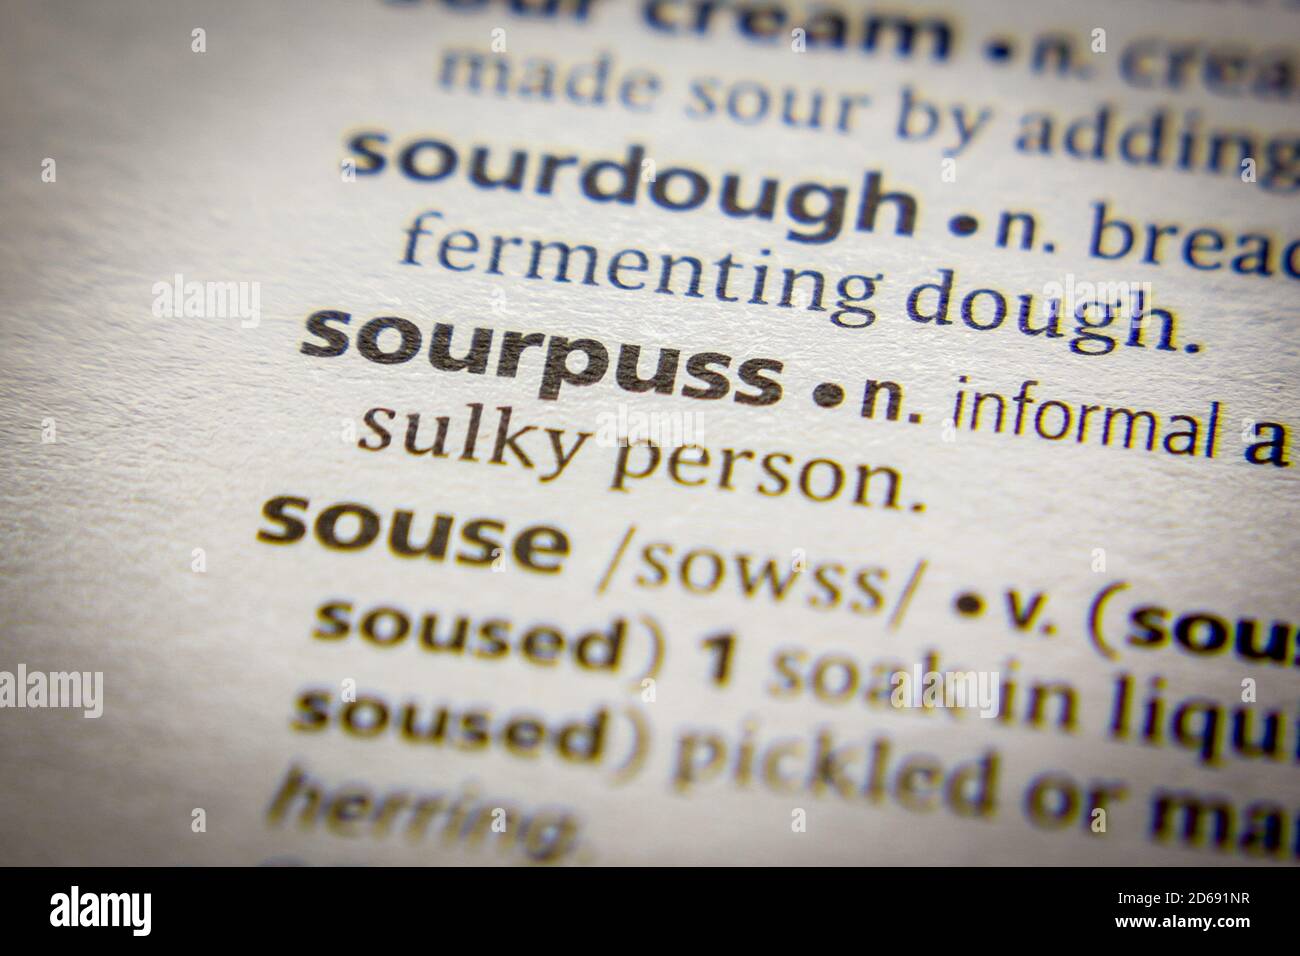 Word or phrase Sourpuss in a dictionary Stock Photo